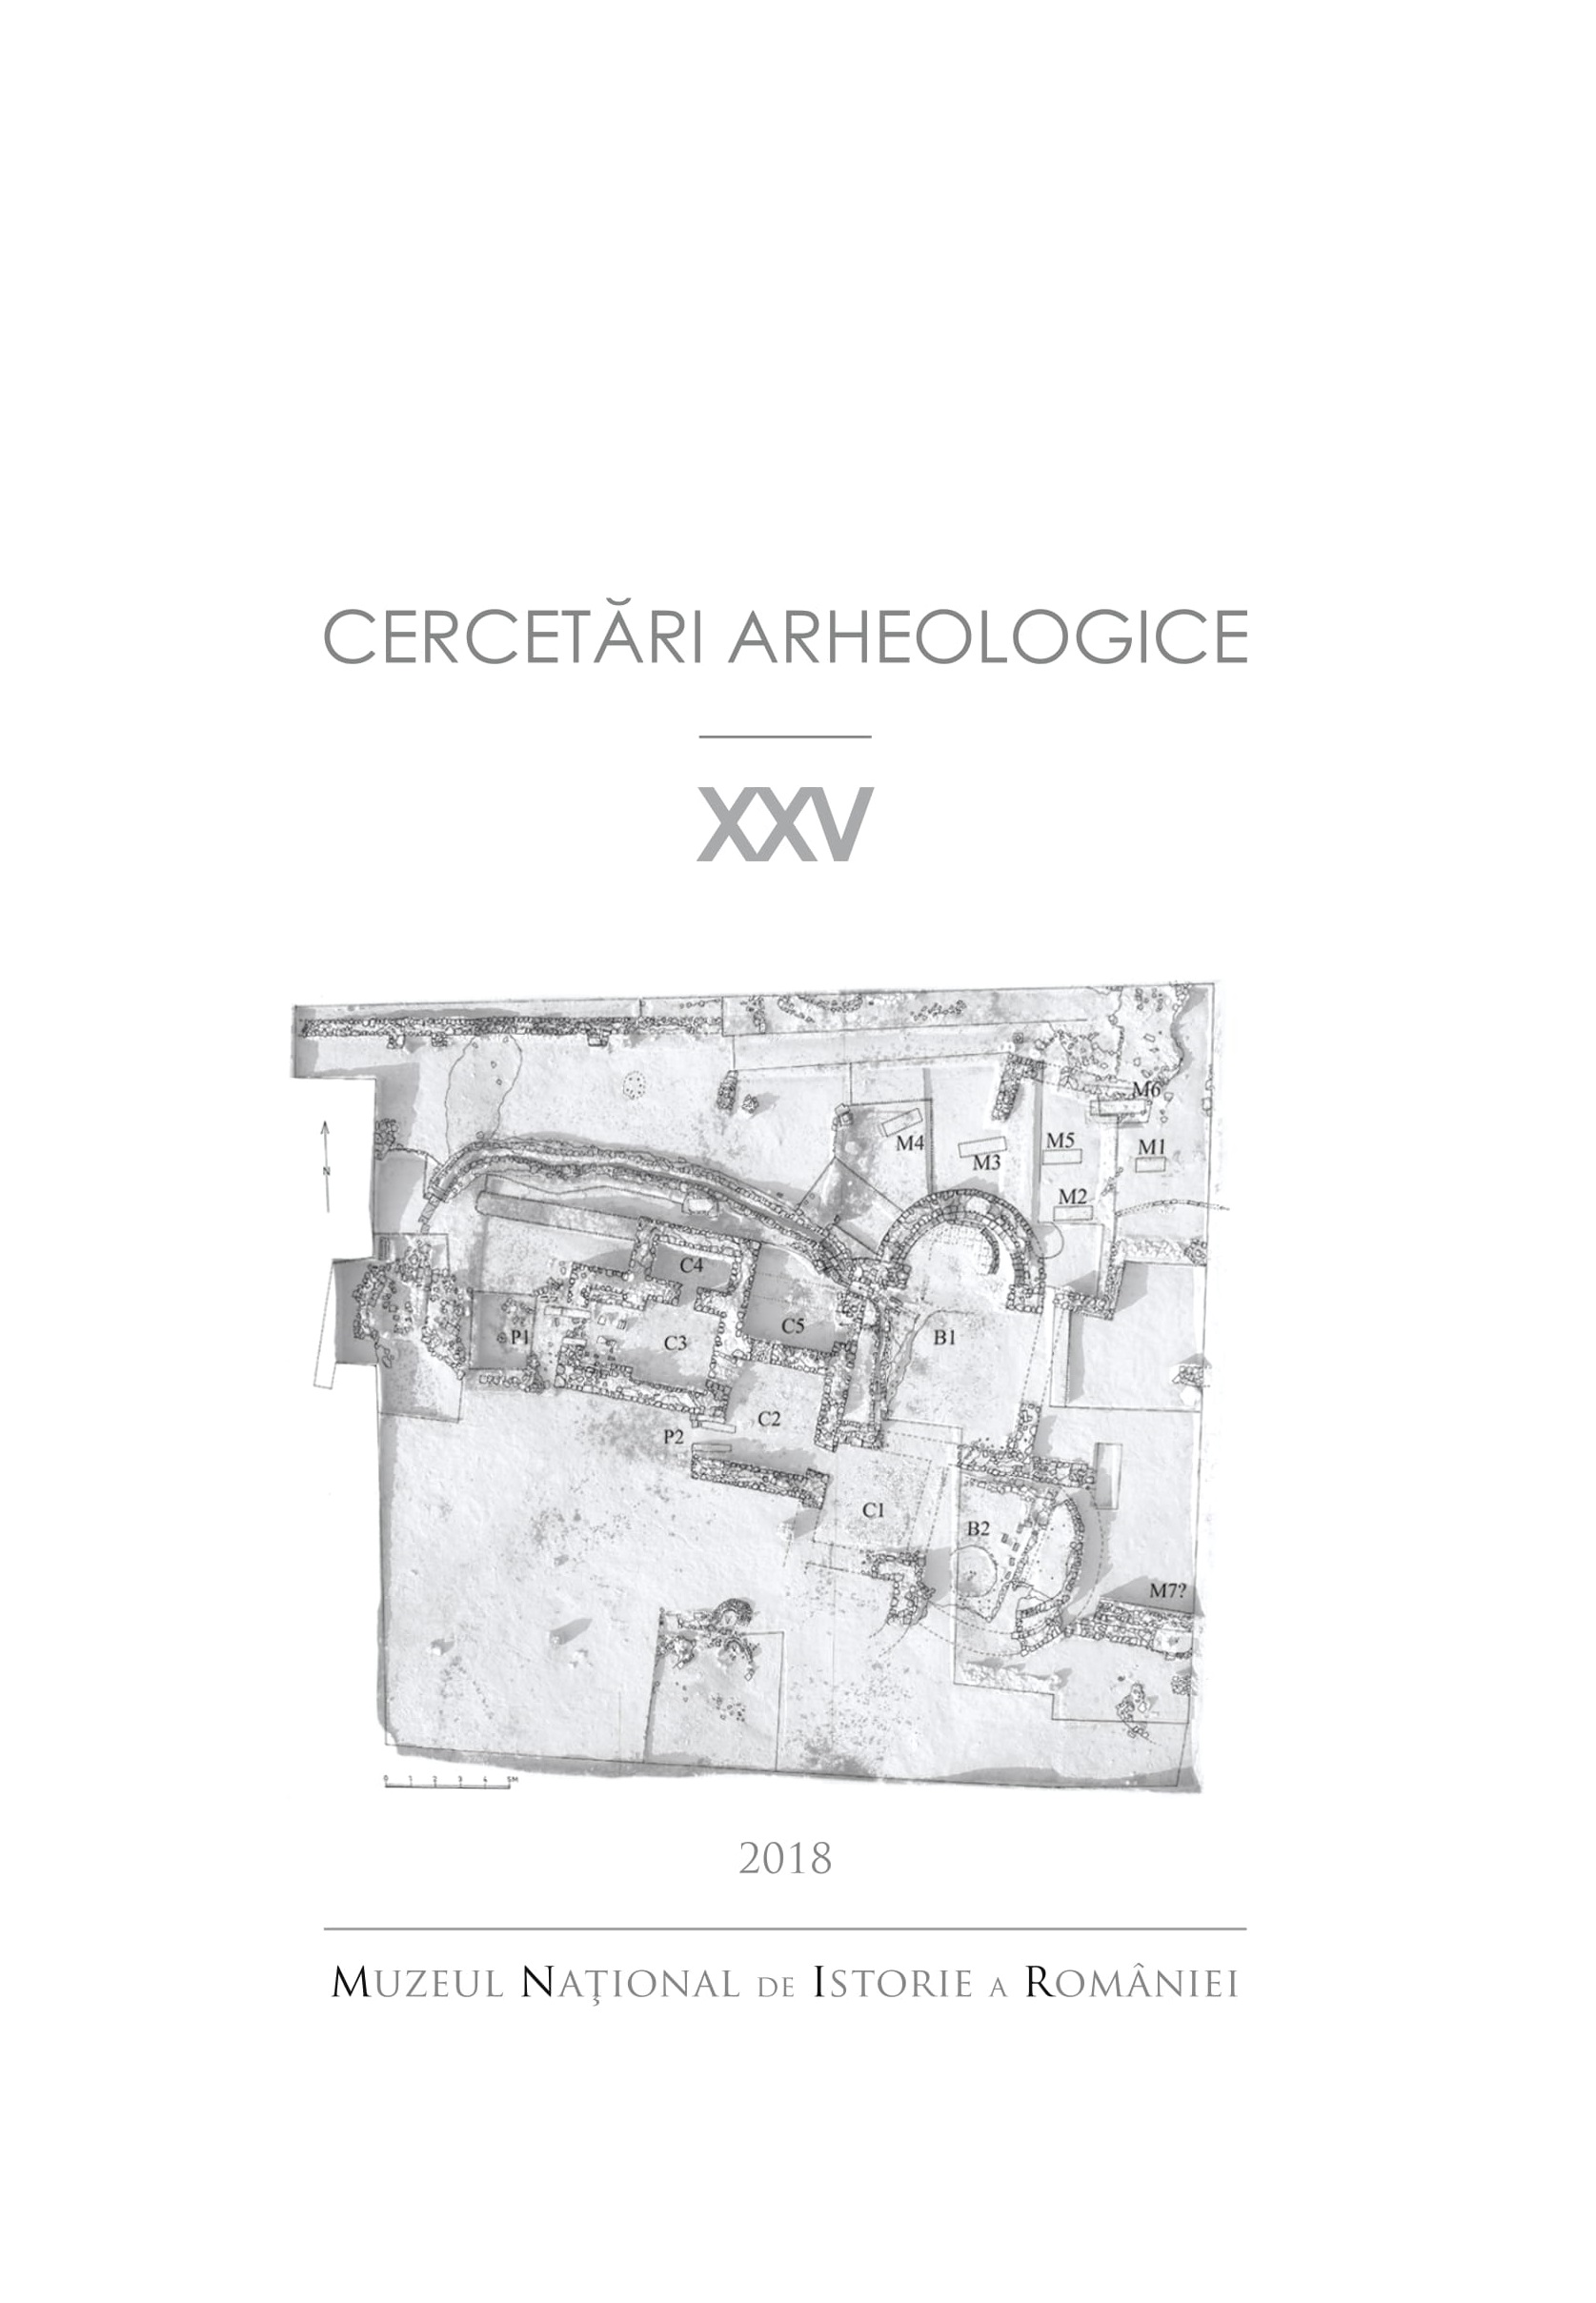 (Notes regarding Caransebeș-downtown cemetery, early phase, 11th to 12th centuries Cover Image